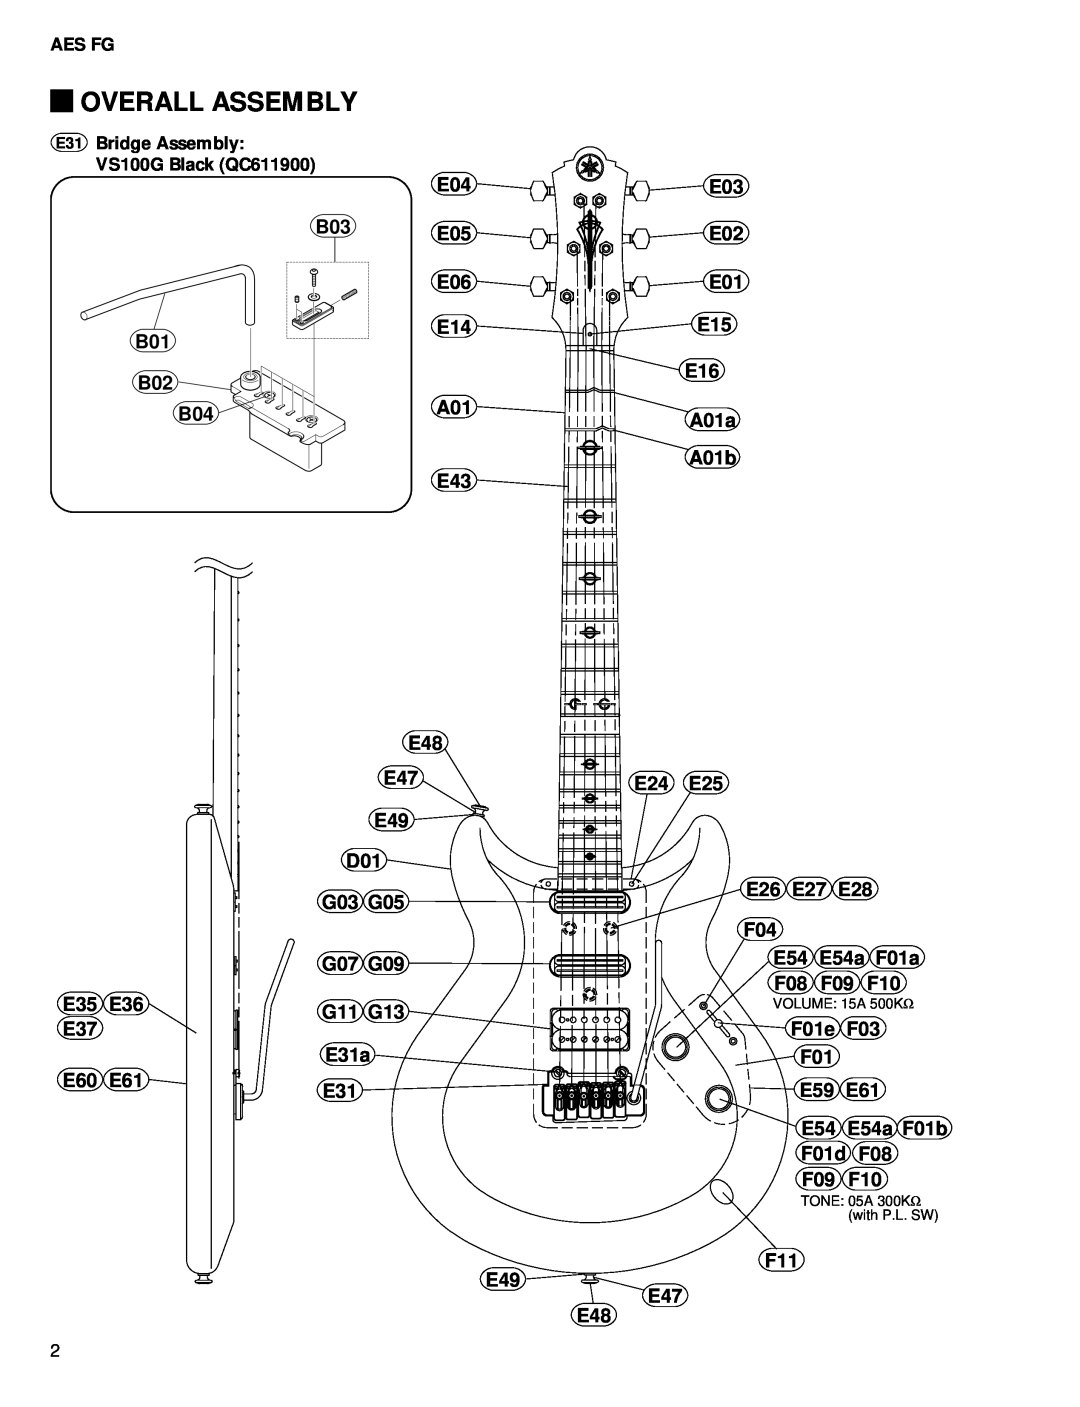 Yamaha Electric Guitar AES FG, 11575 service manual Overall Assembly 